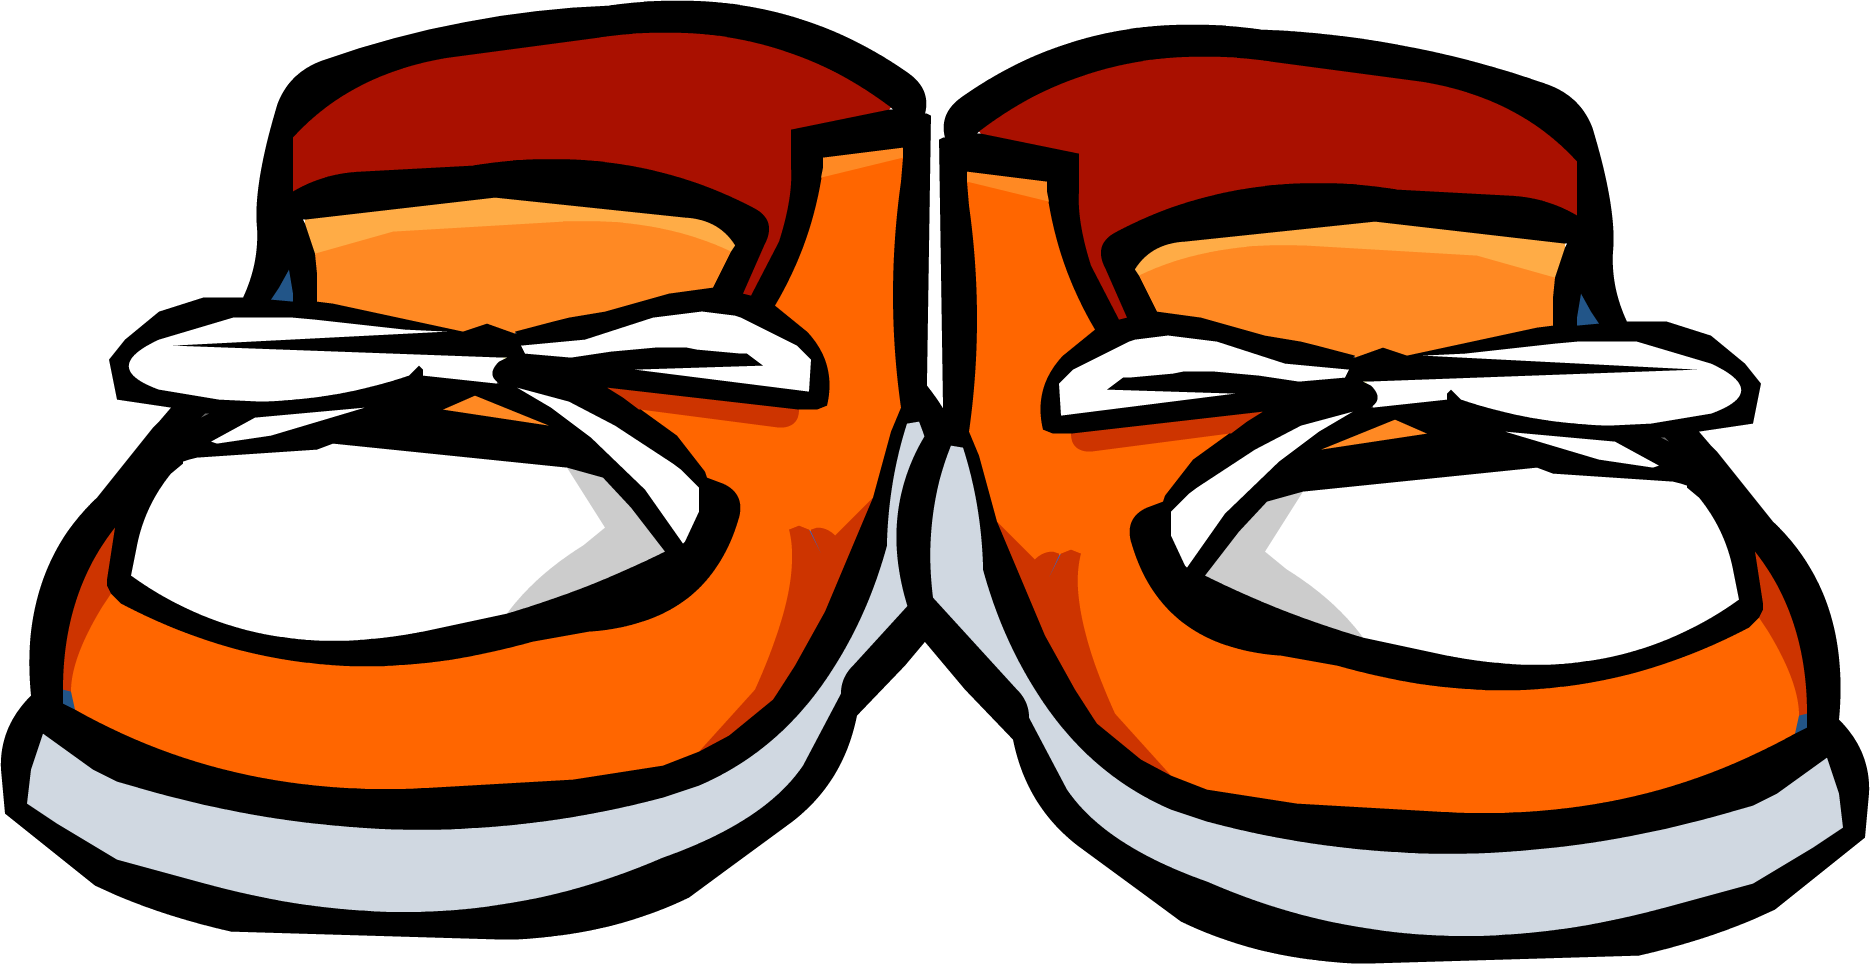 Feet Items - Club Penguin Wiki Shoes (1870x964)